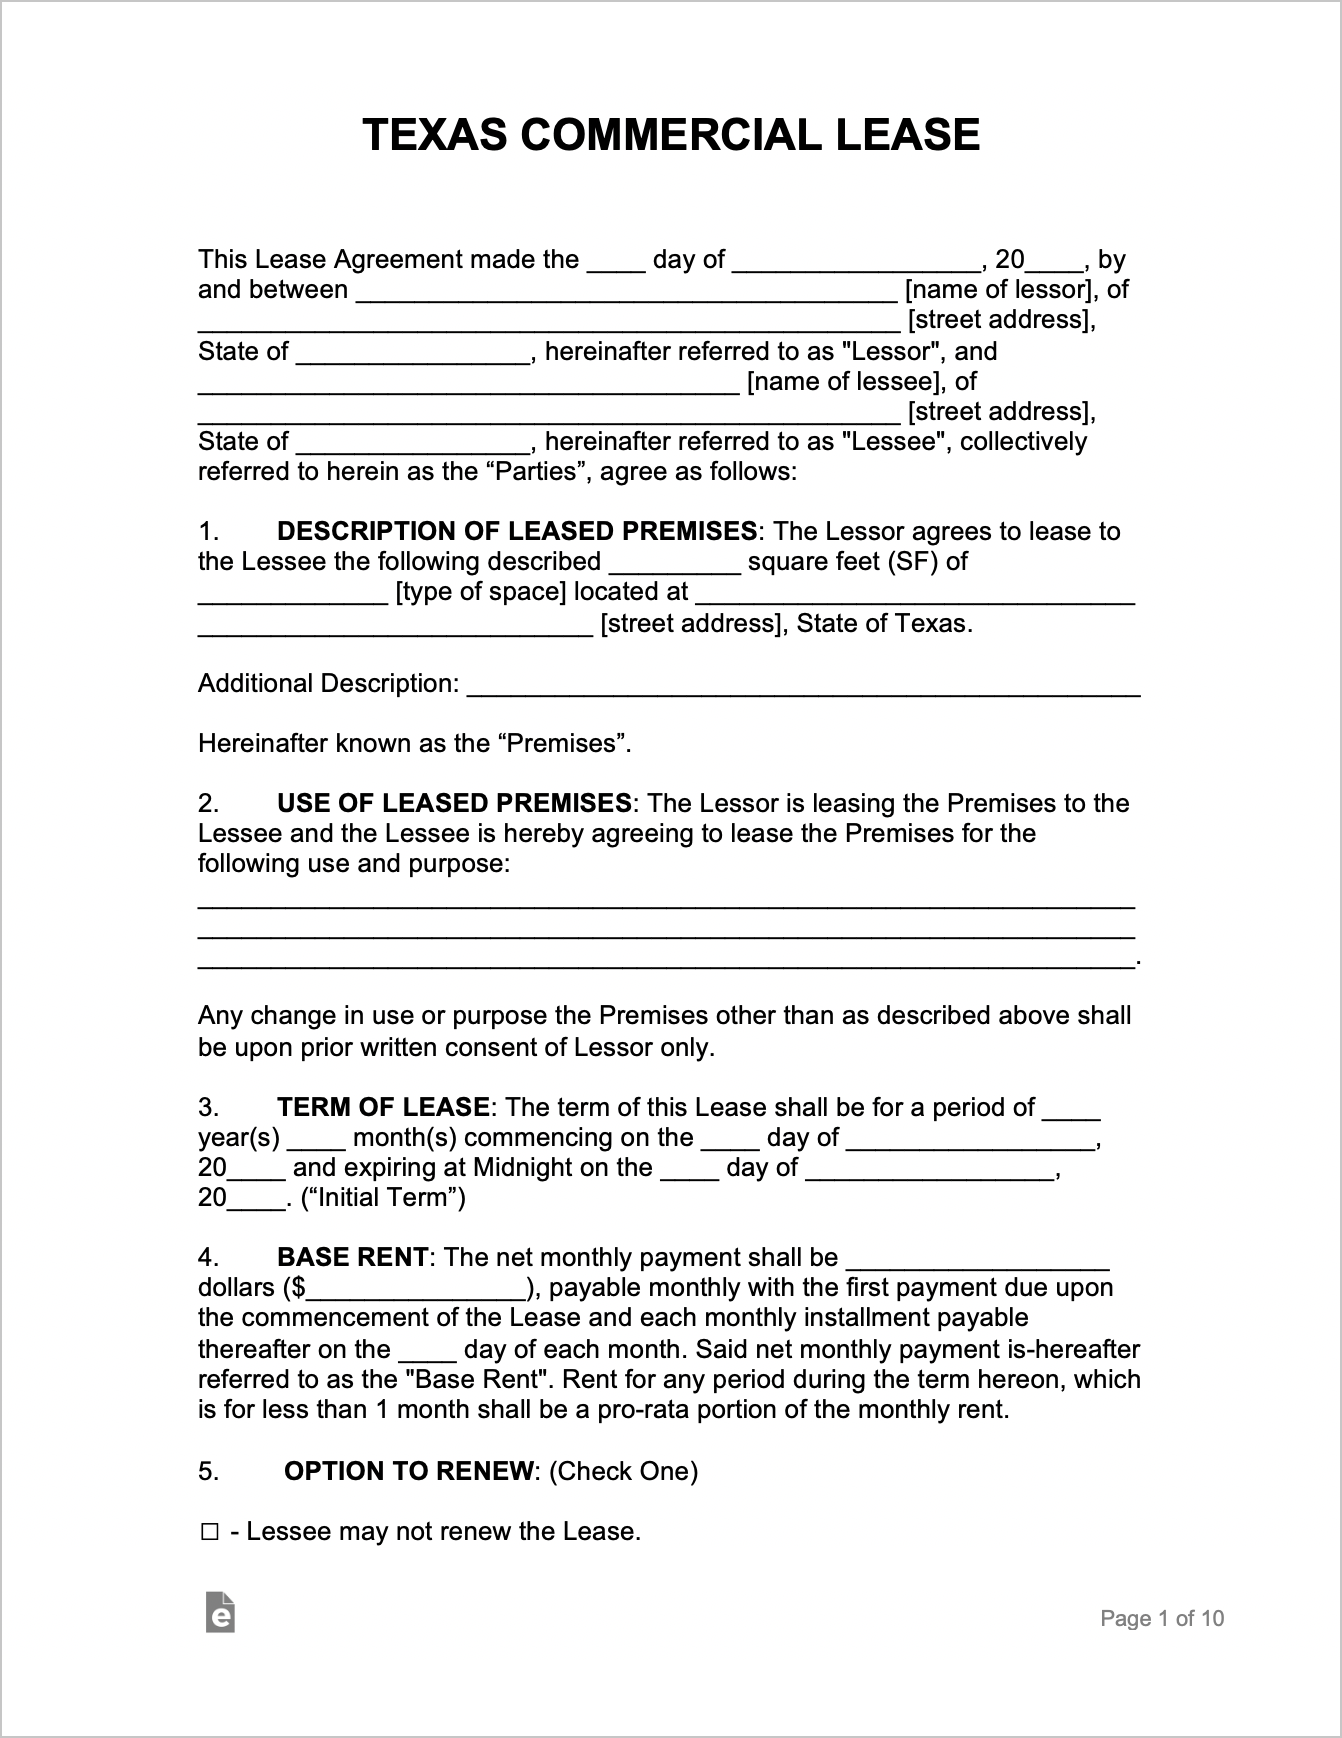 free-texas-commercial-lease-agreement-pdf